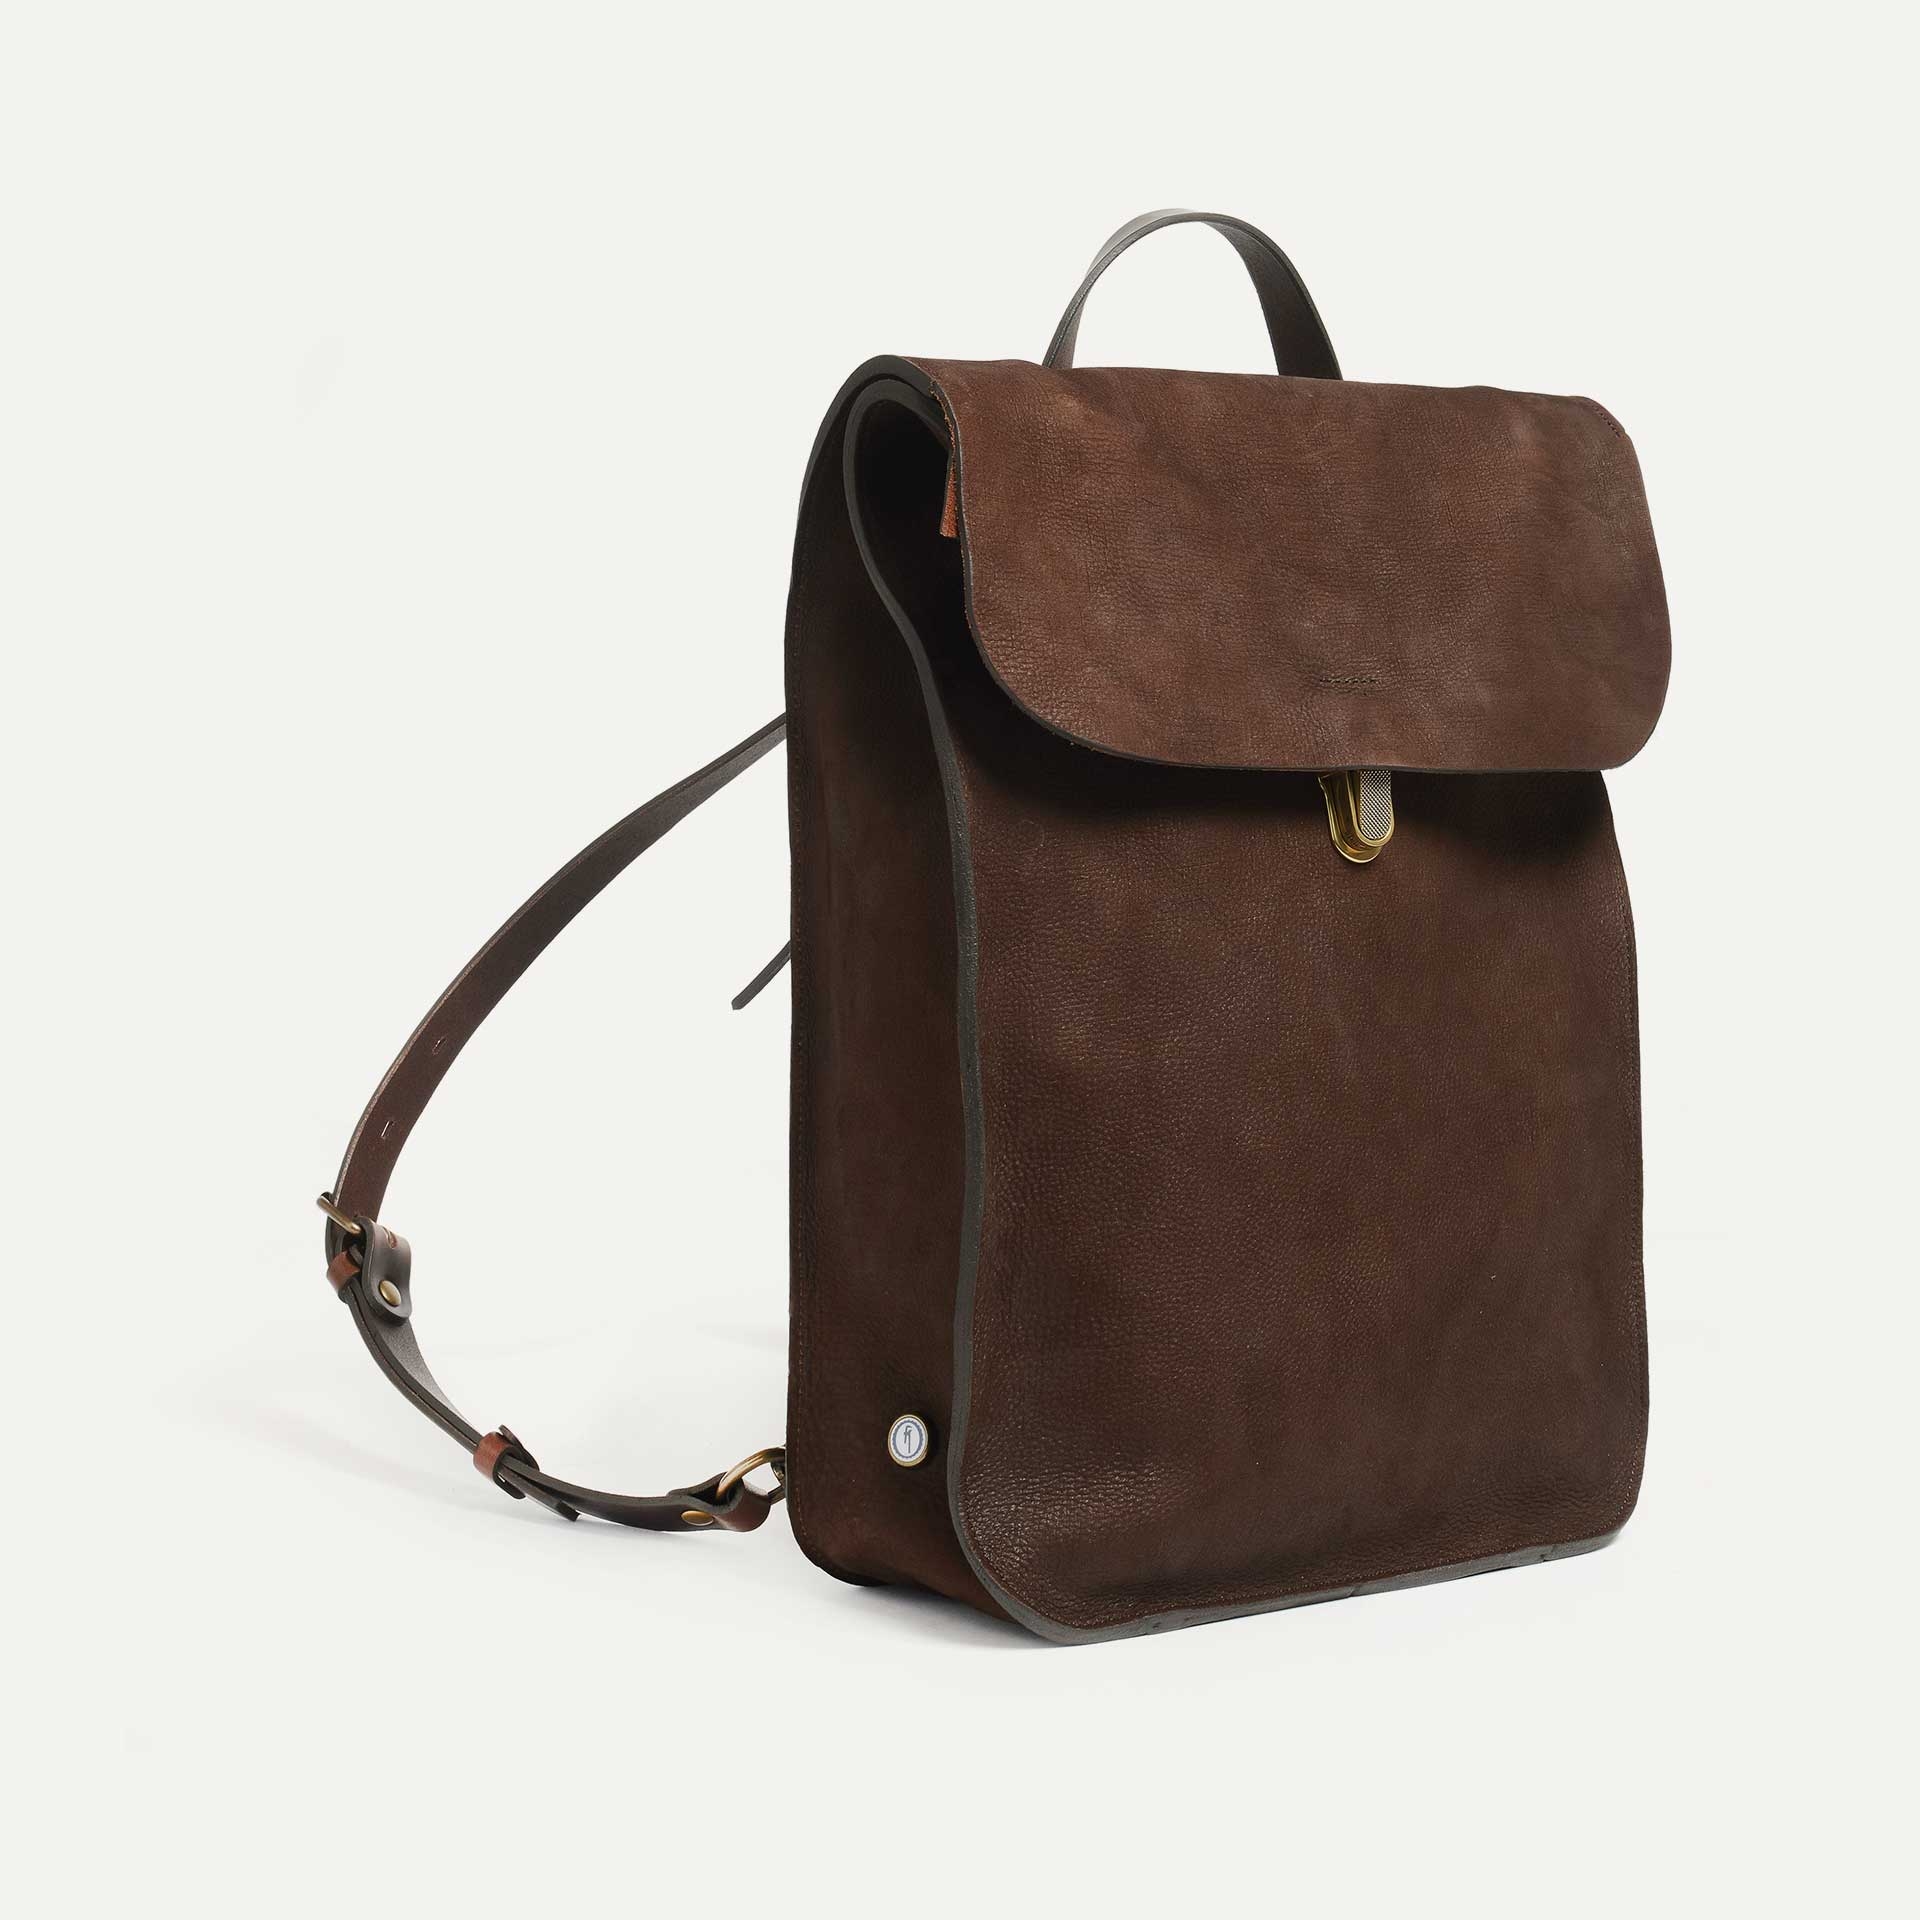 Puncho leather backpack WAX - Coffee / Waxed Leather (image n°2)